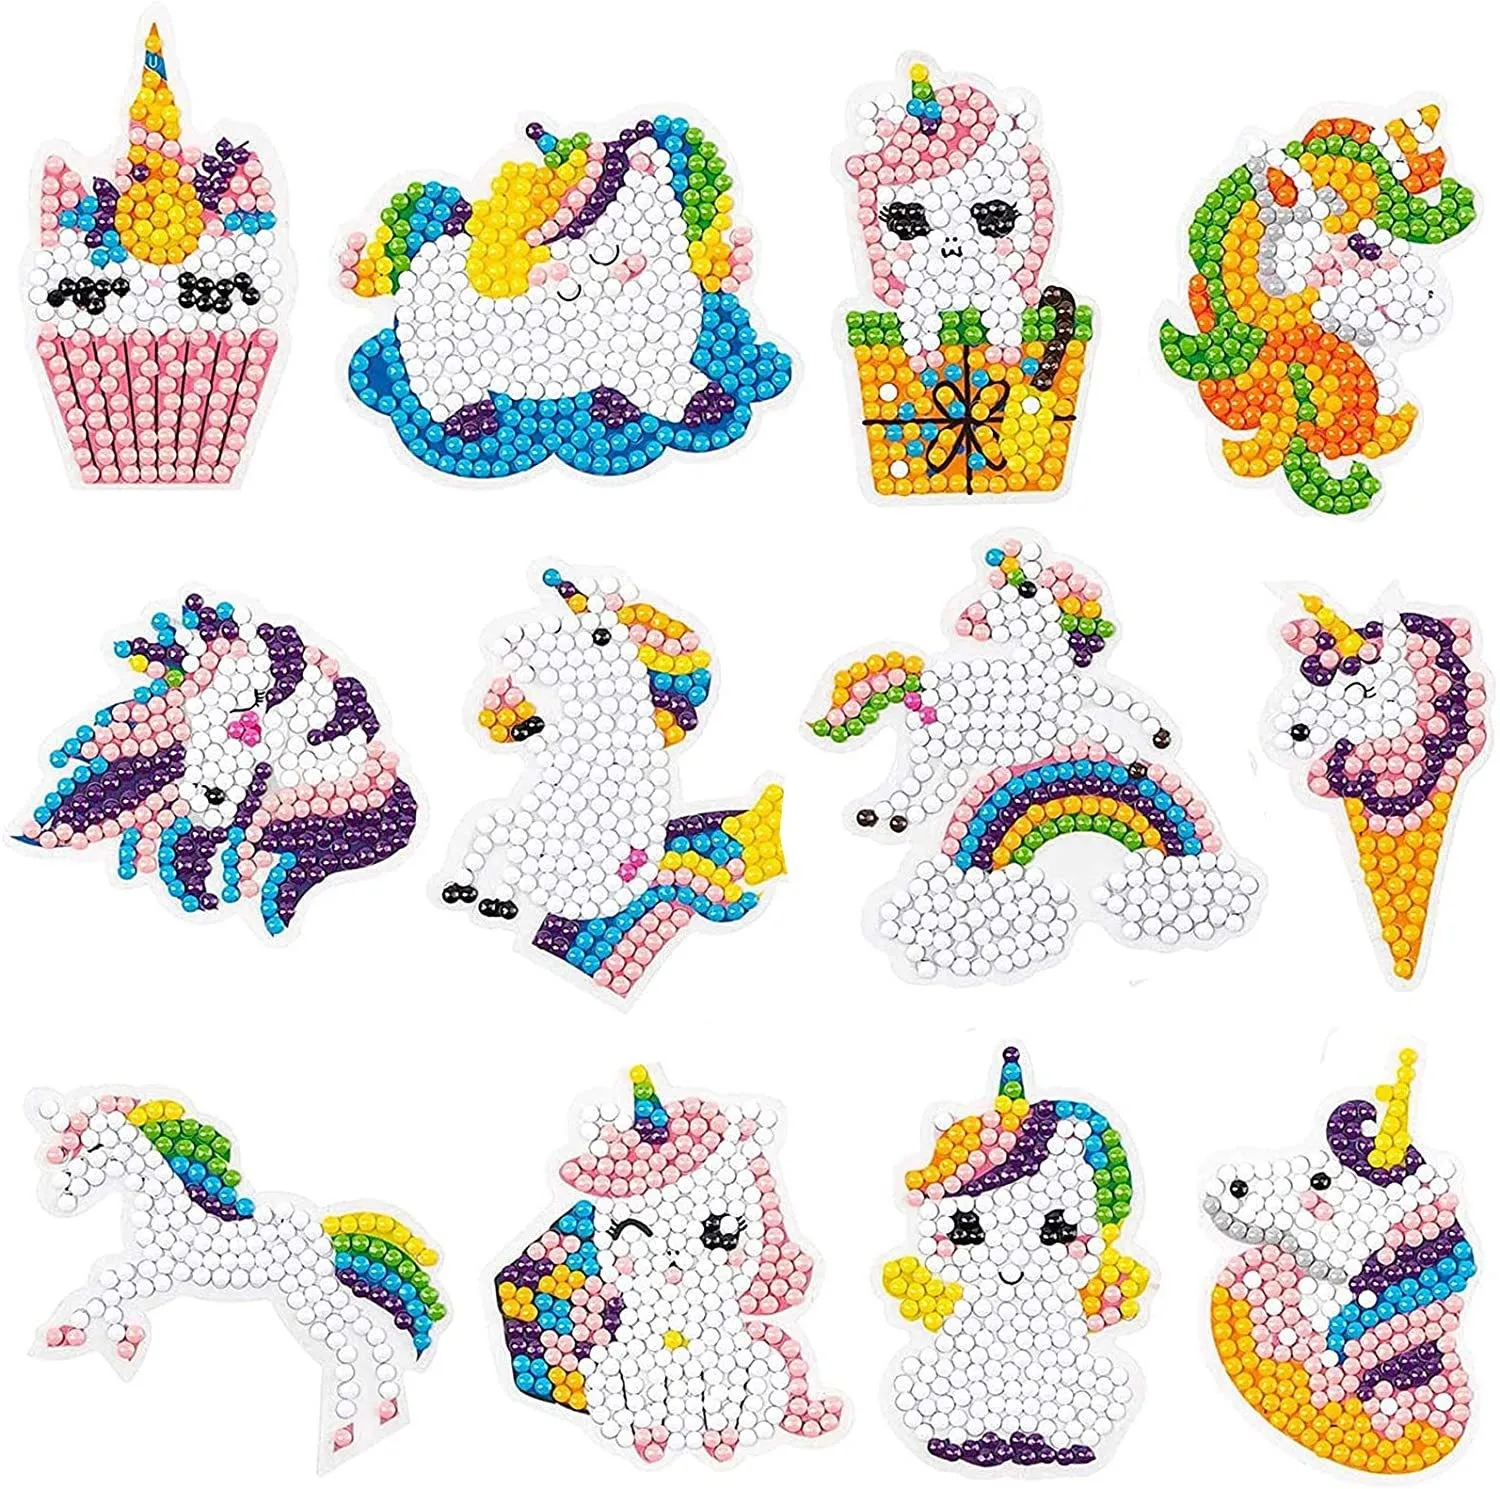 Cartoon Diamond Painting Stickers Kits for Kids DIY Full Drill Diamond Painting by Numbers Diamond Art Crafts Children Toy Gift